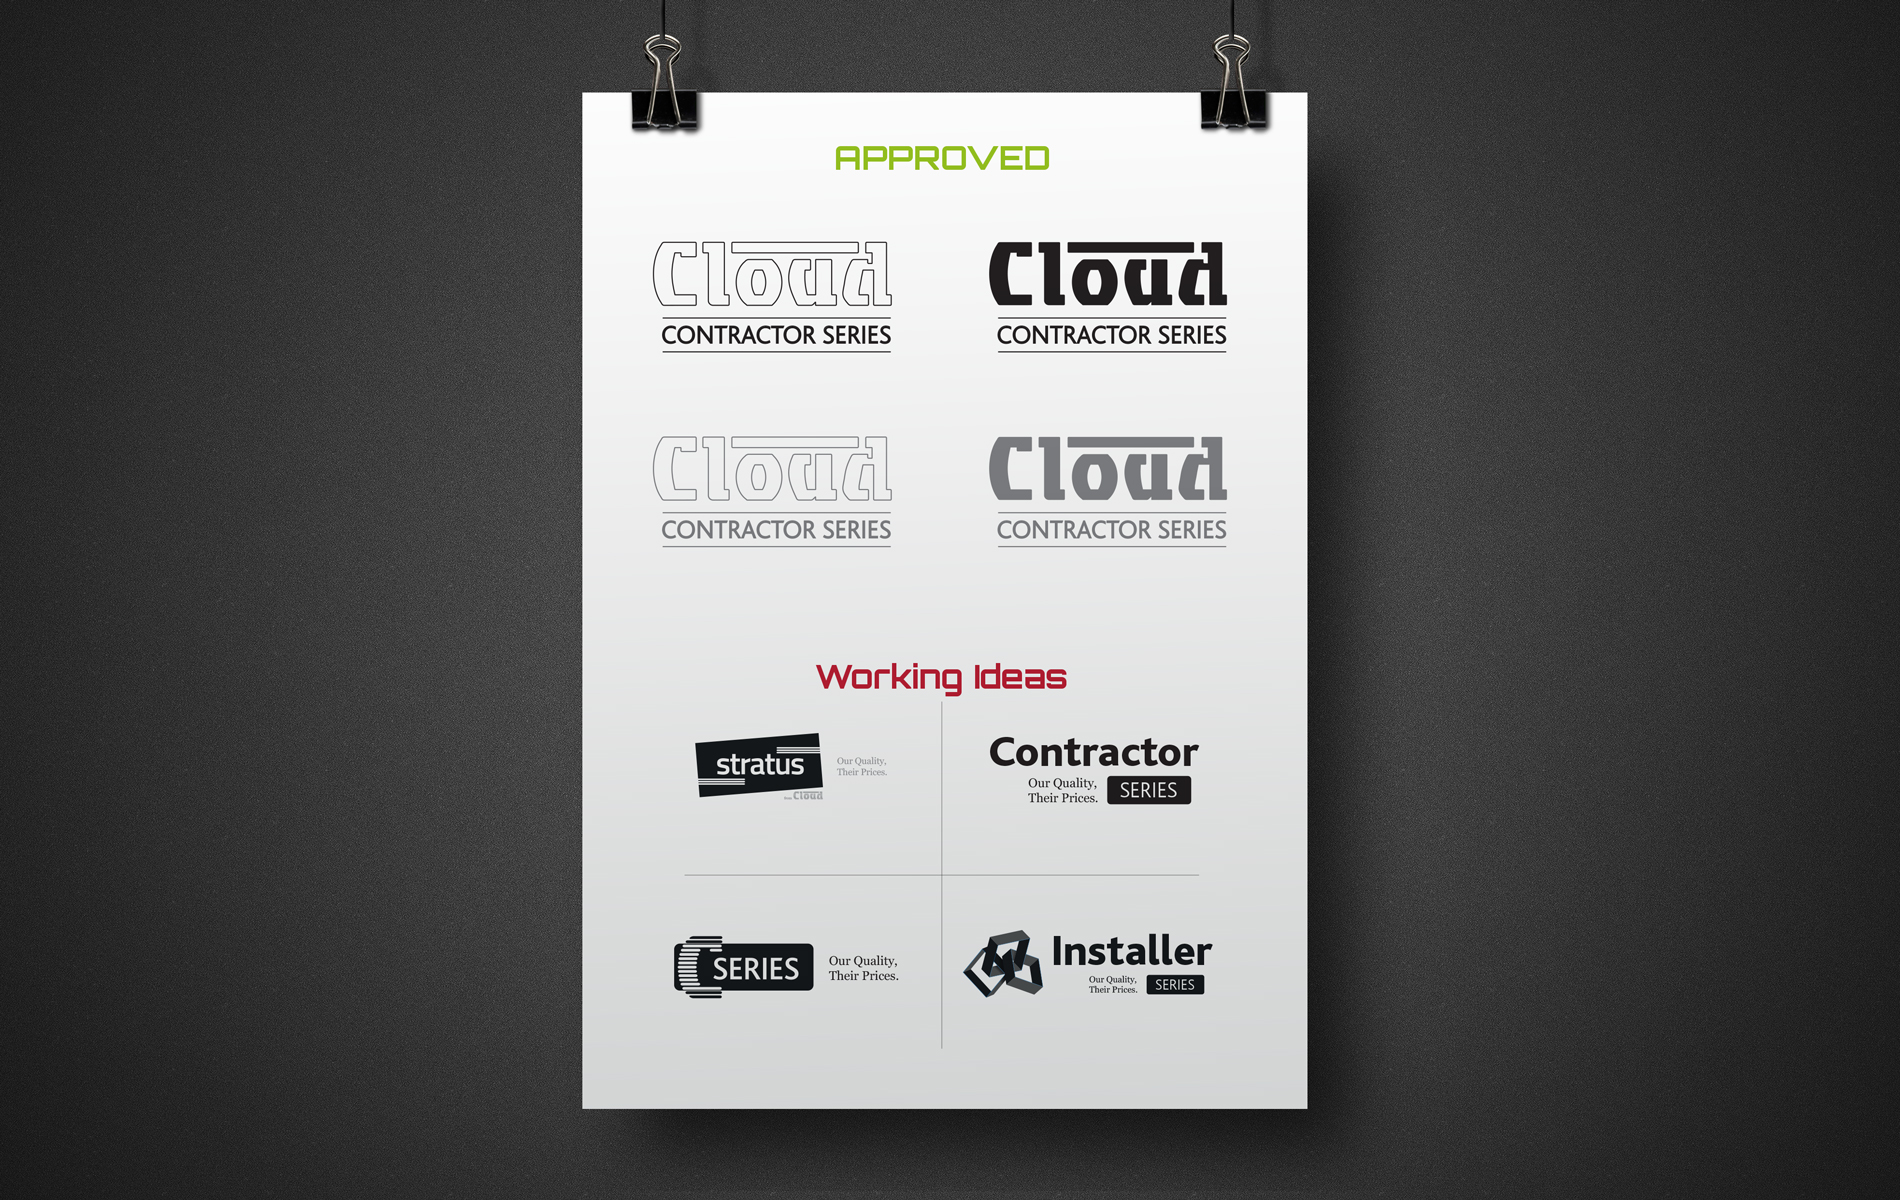 Cloud introduces new Contractor Series at ISE 2019